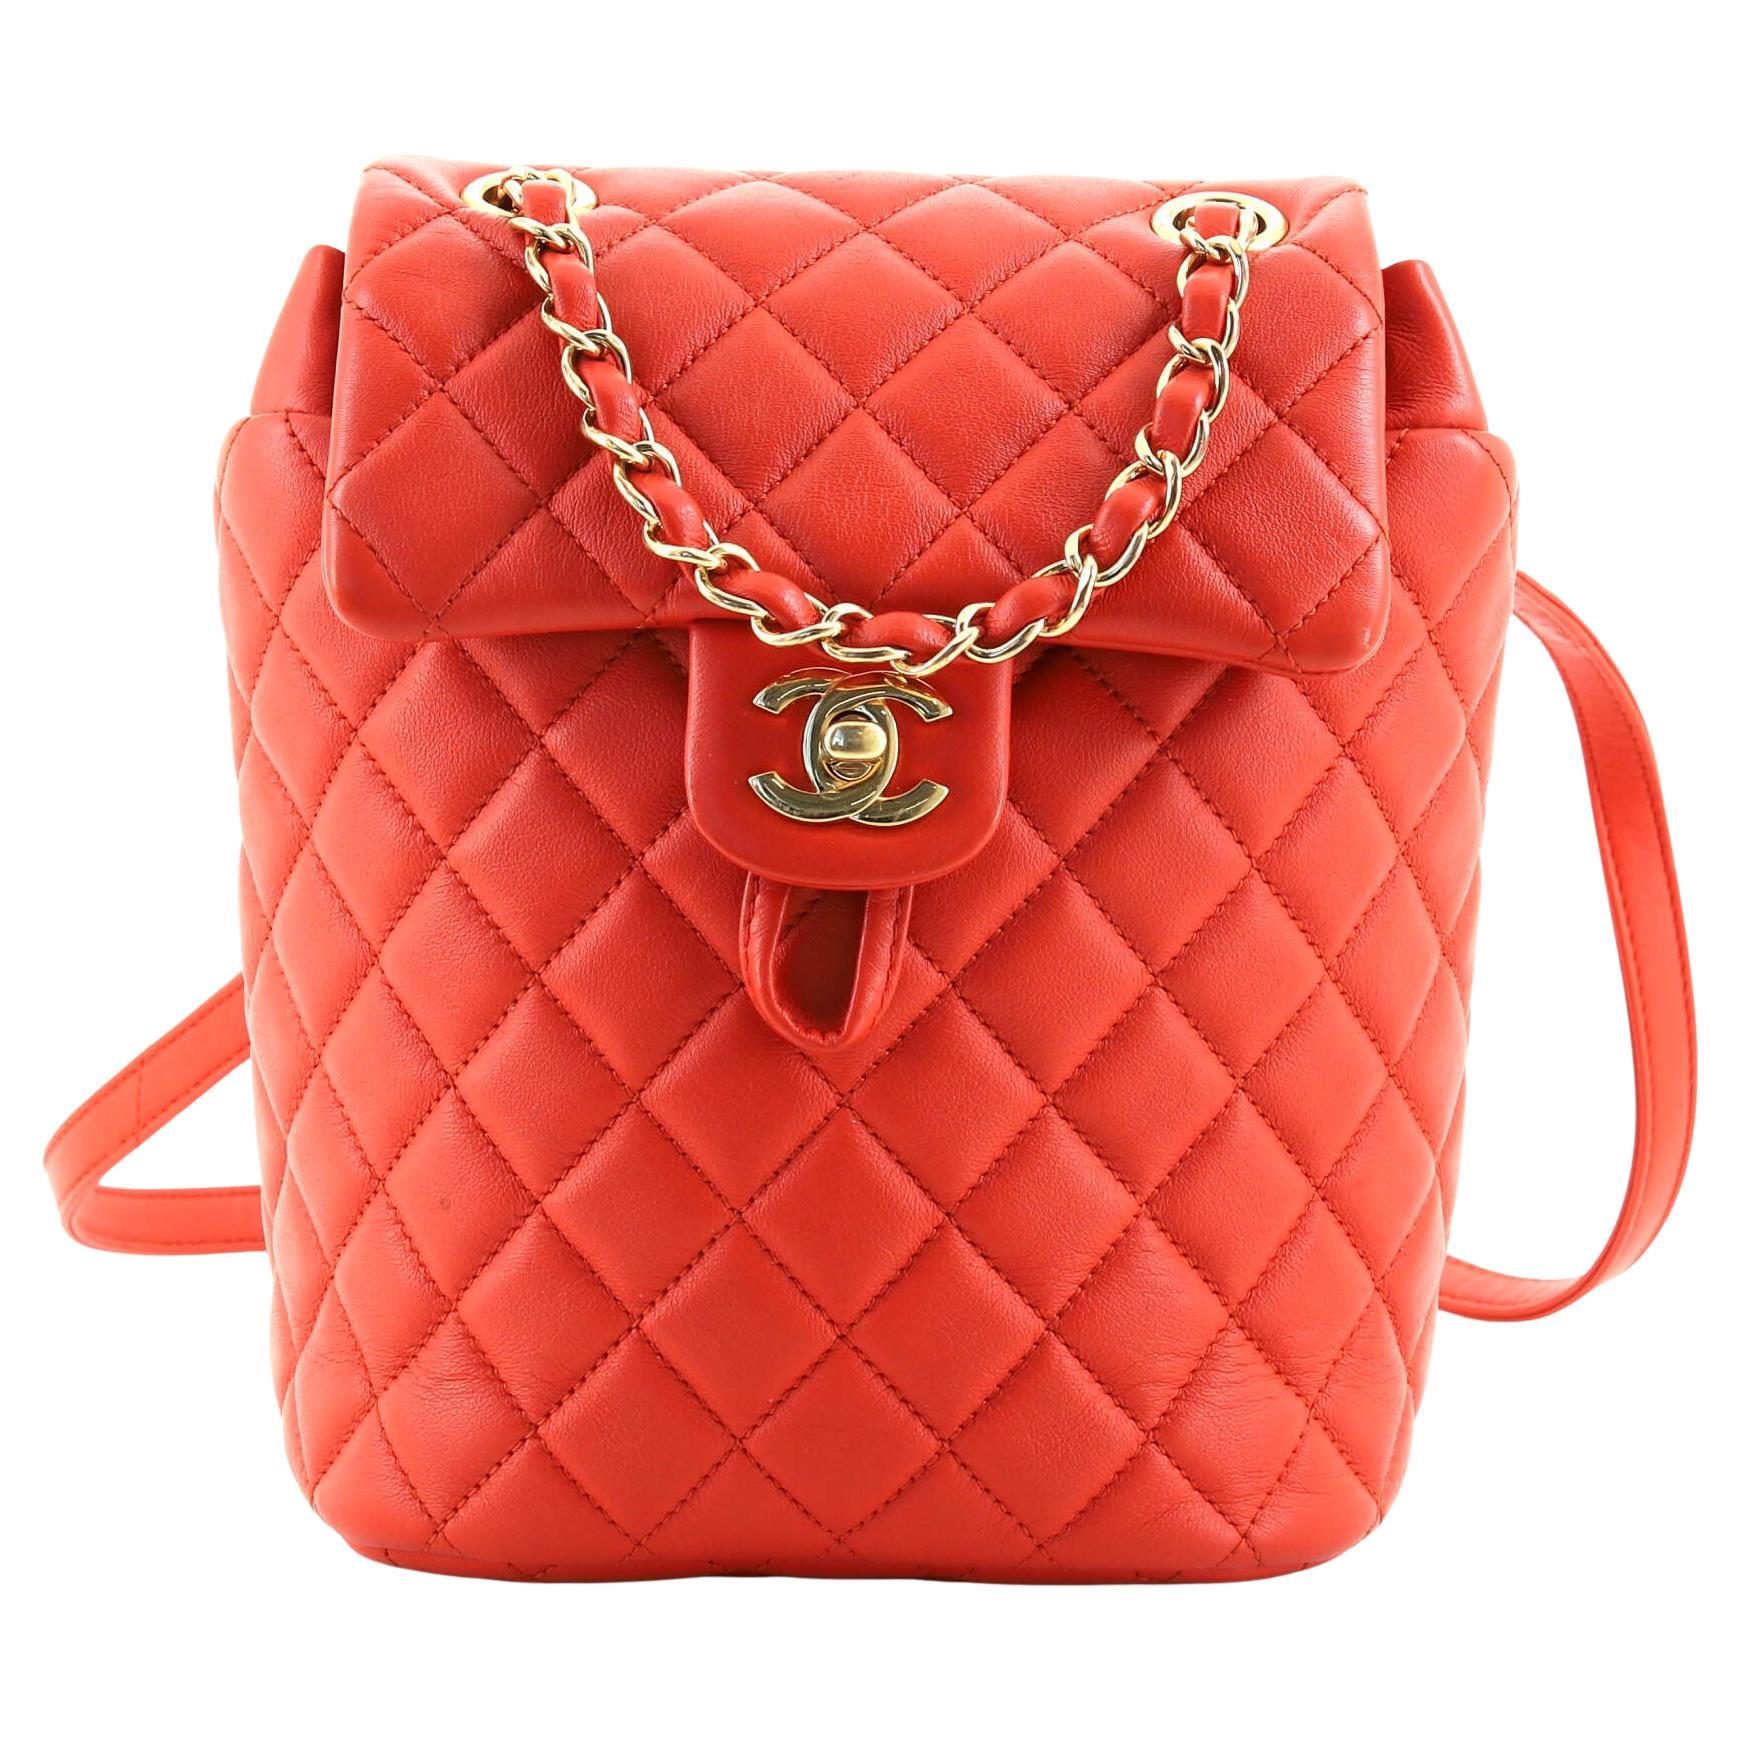 Chanel Urban Spirit Backpack Quilted Lambskin Mini